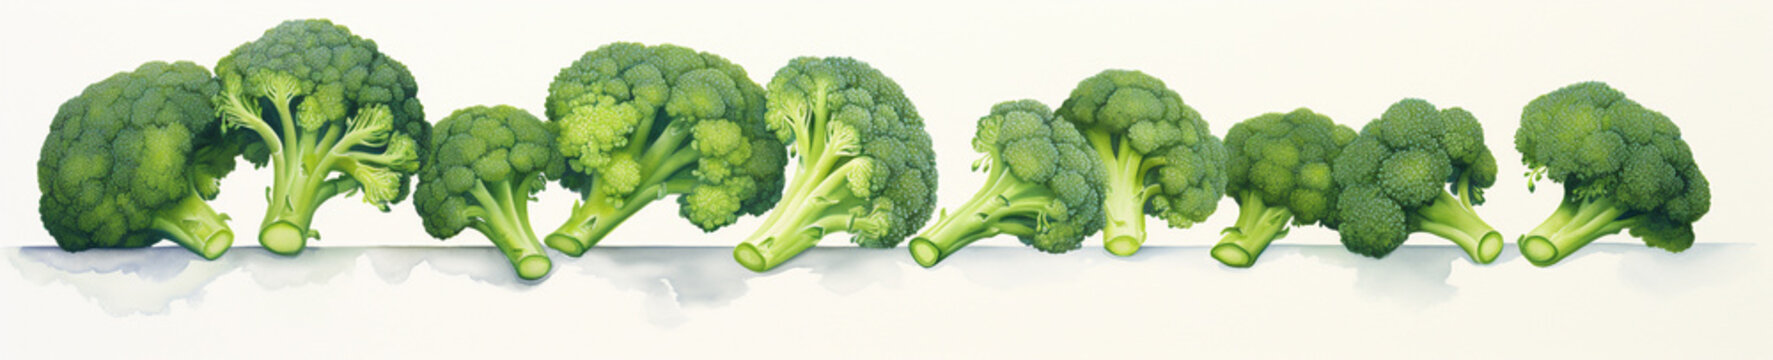 A Minimal Watercolor Banner of a Row of Broccoli on a White Background